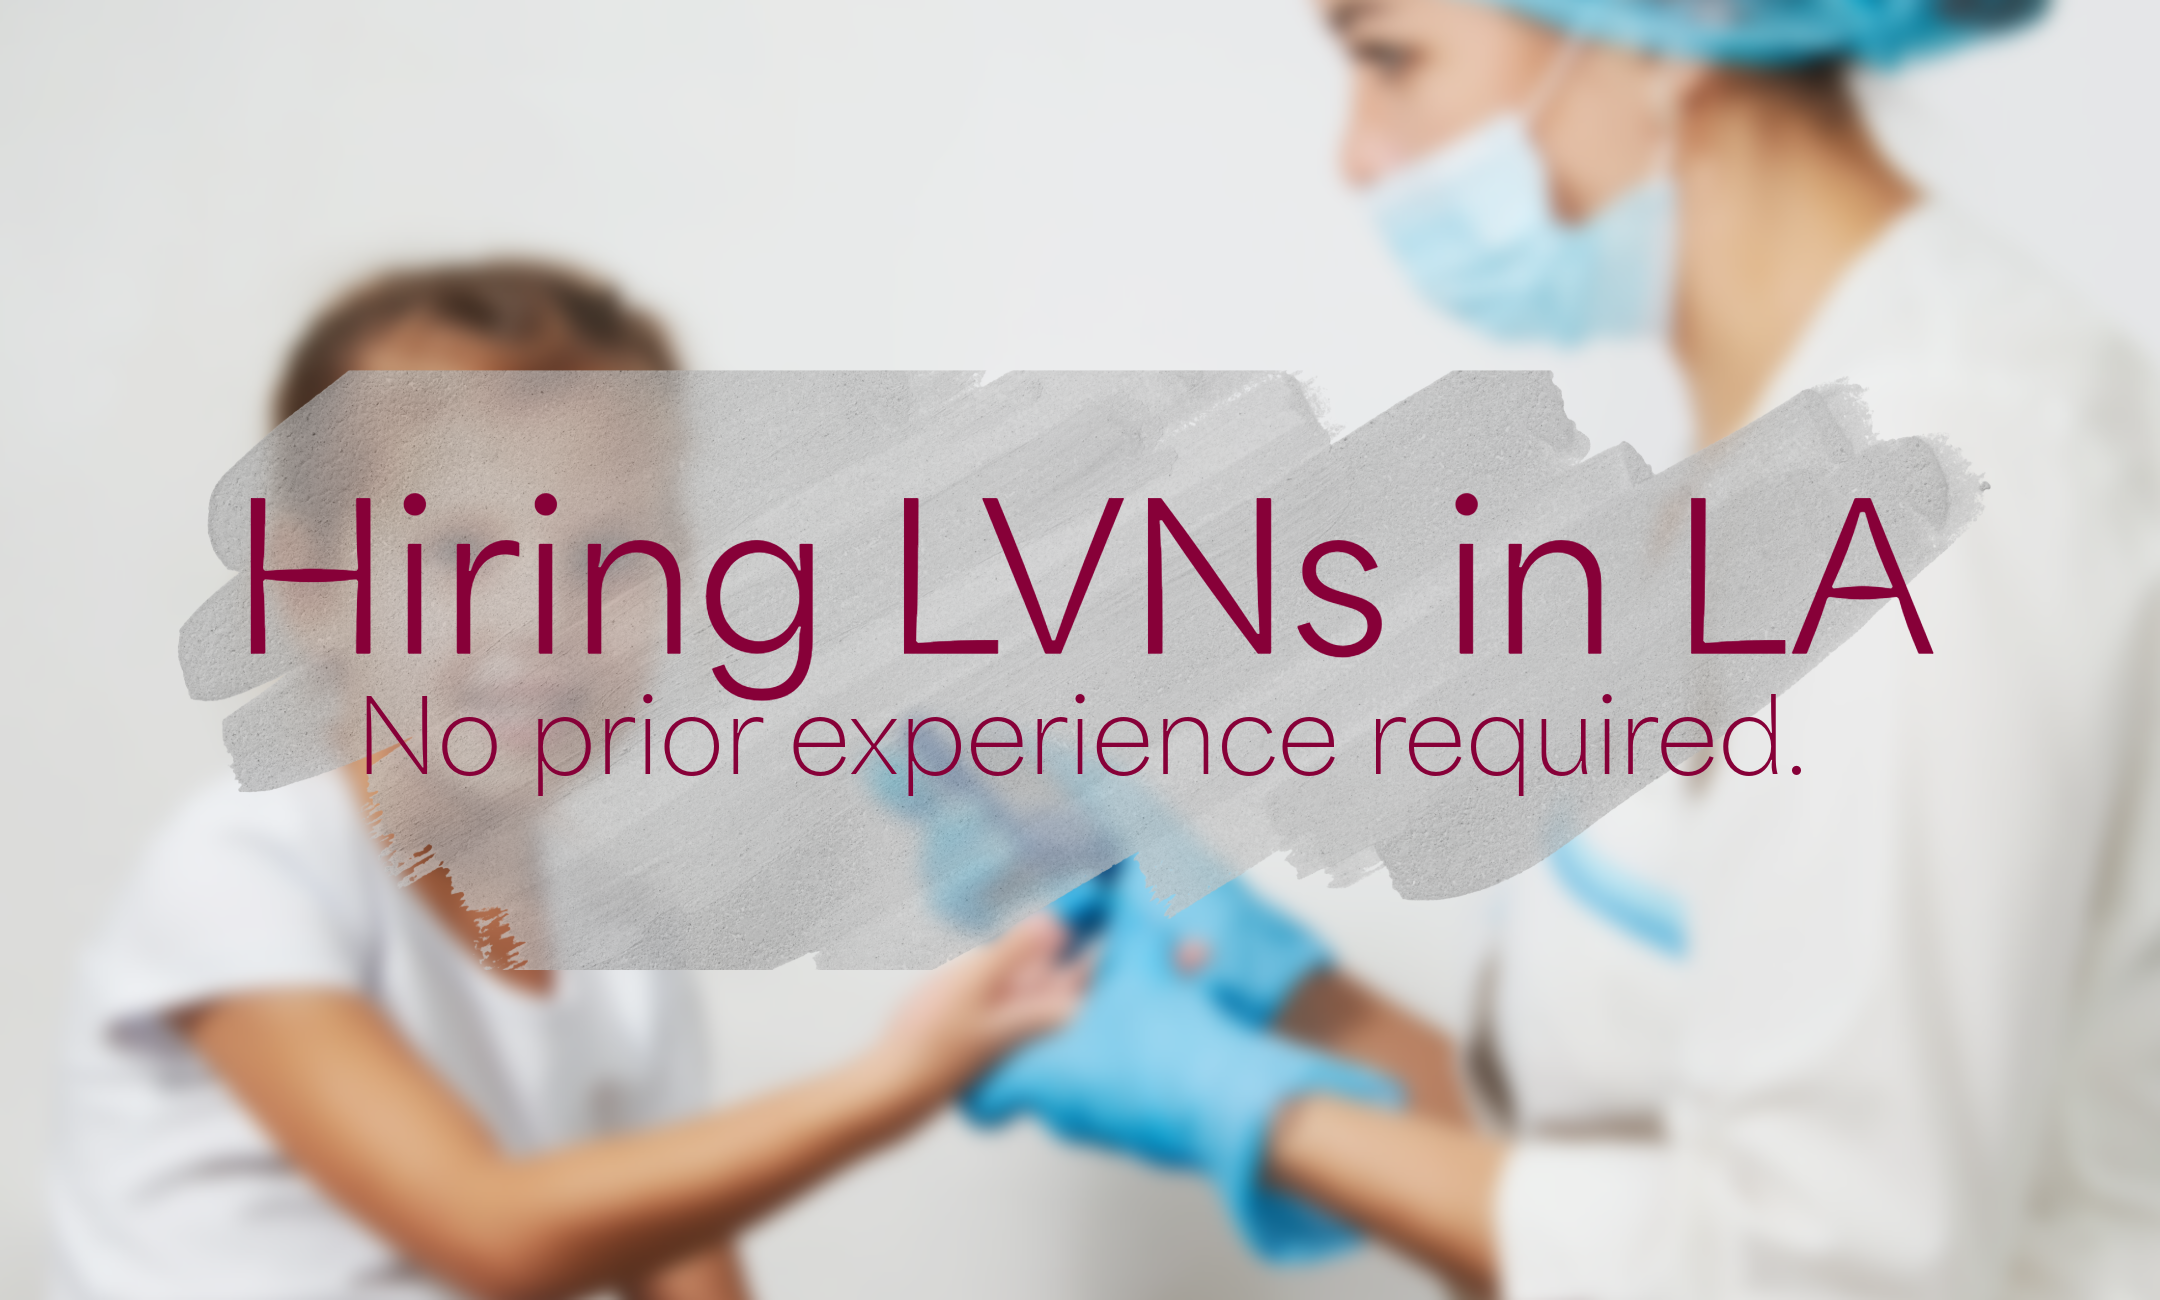 Your New Job As An LVN Awaits (No Experience Required!)